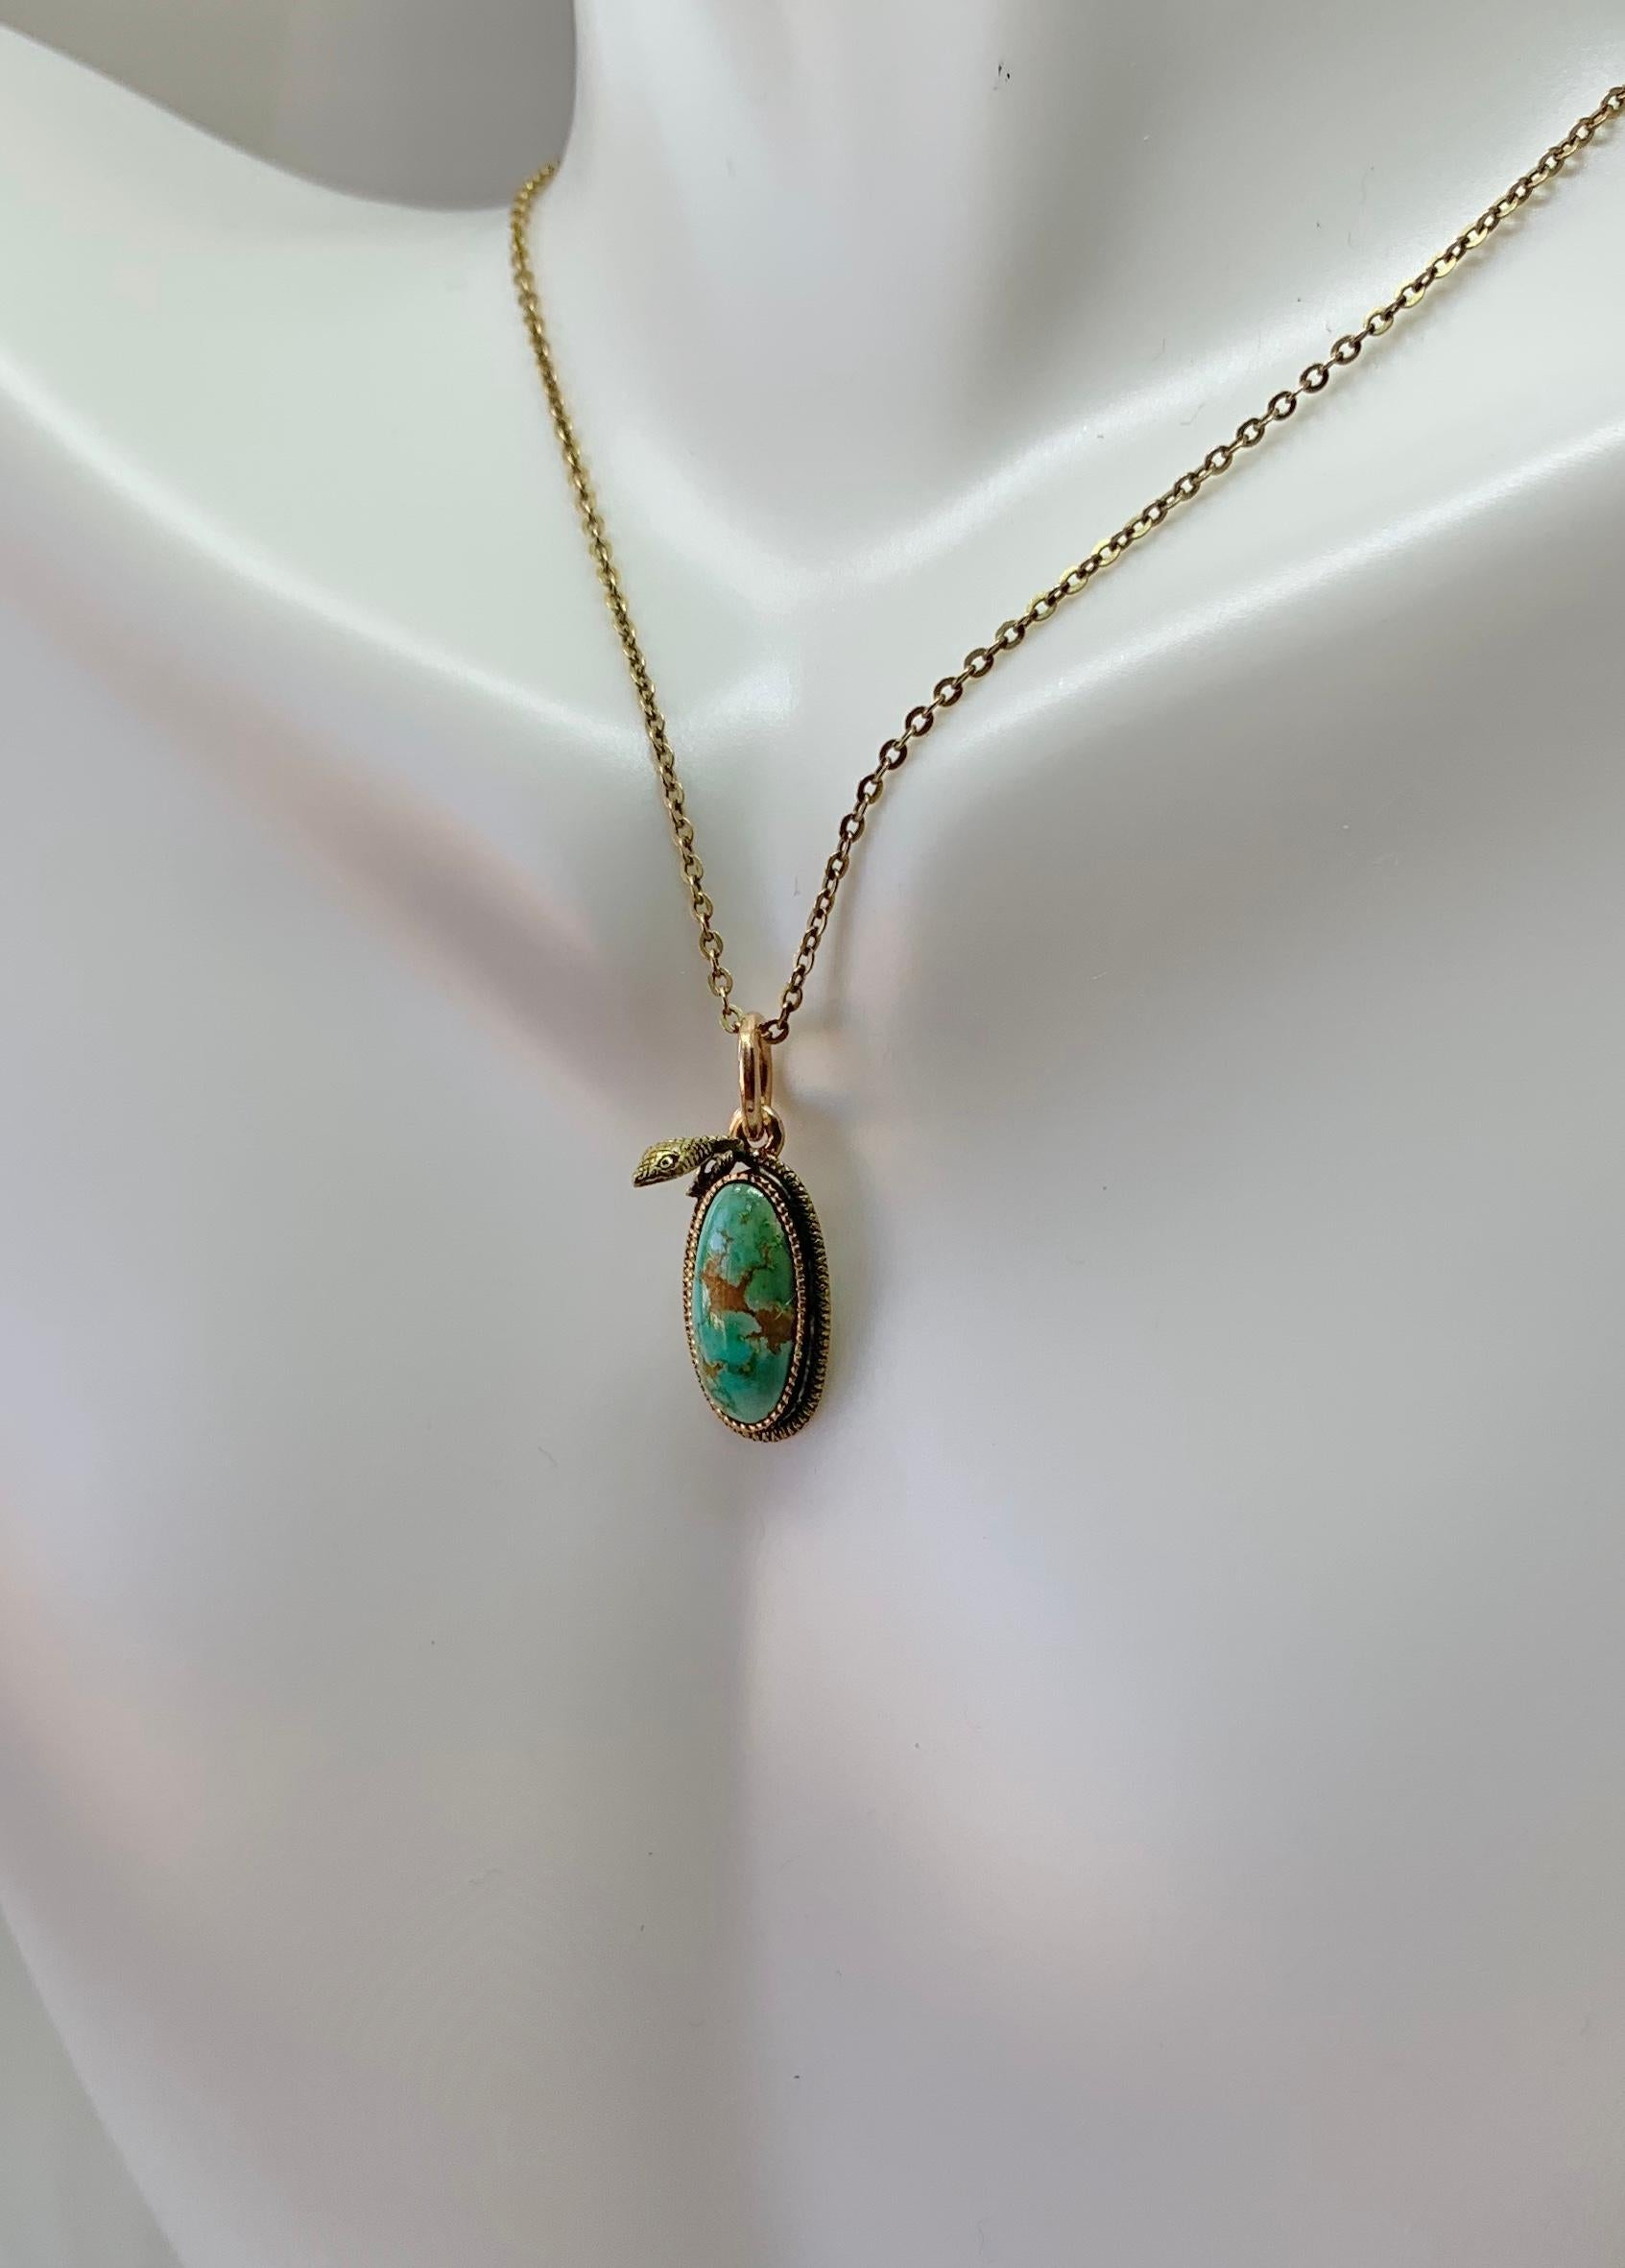 This is a very rare antique Victorian Turquoise Snake Pendant Necklace depicting a snake or serpent wrapped around a Turquoise egg or globe.  The snake is beautifully created with stunning three dimensional design in 14 Karat yellow gold by the